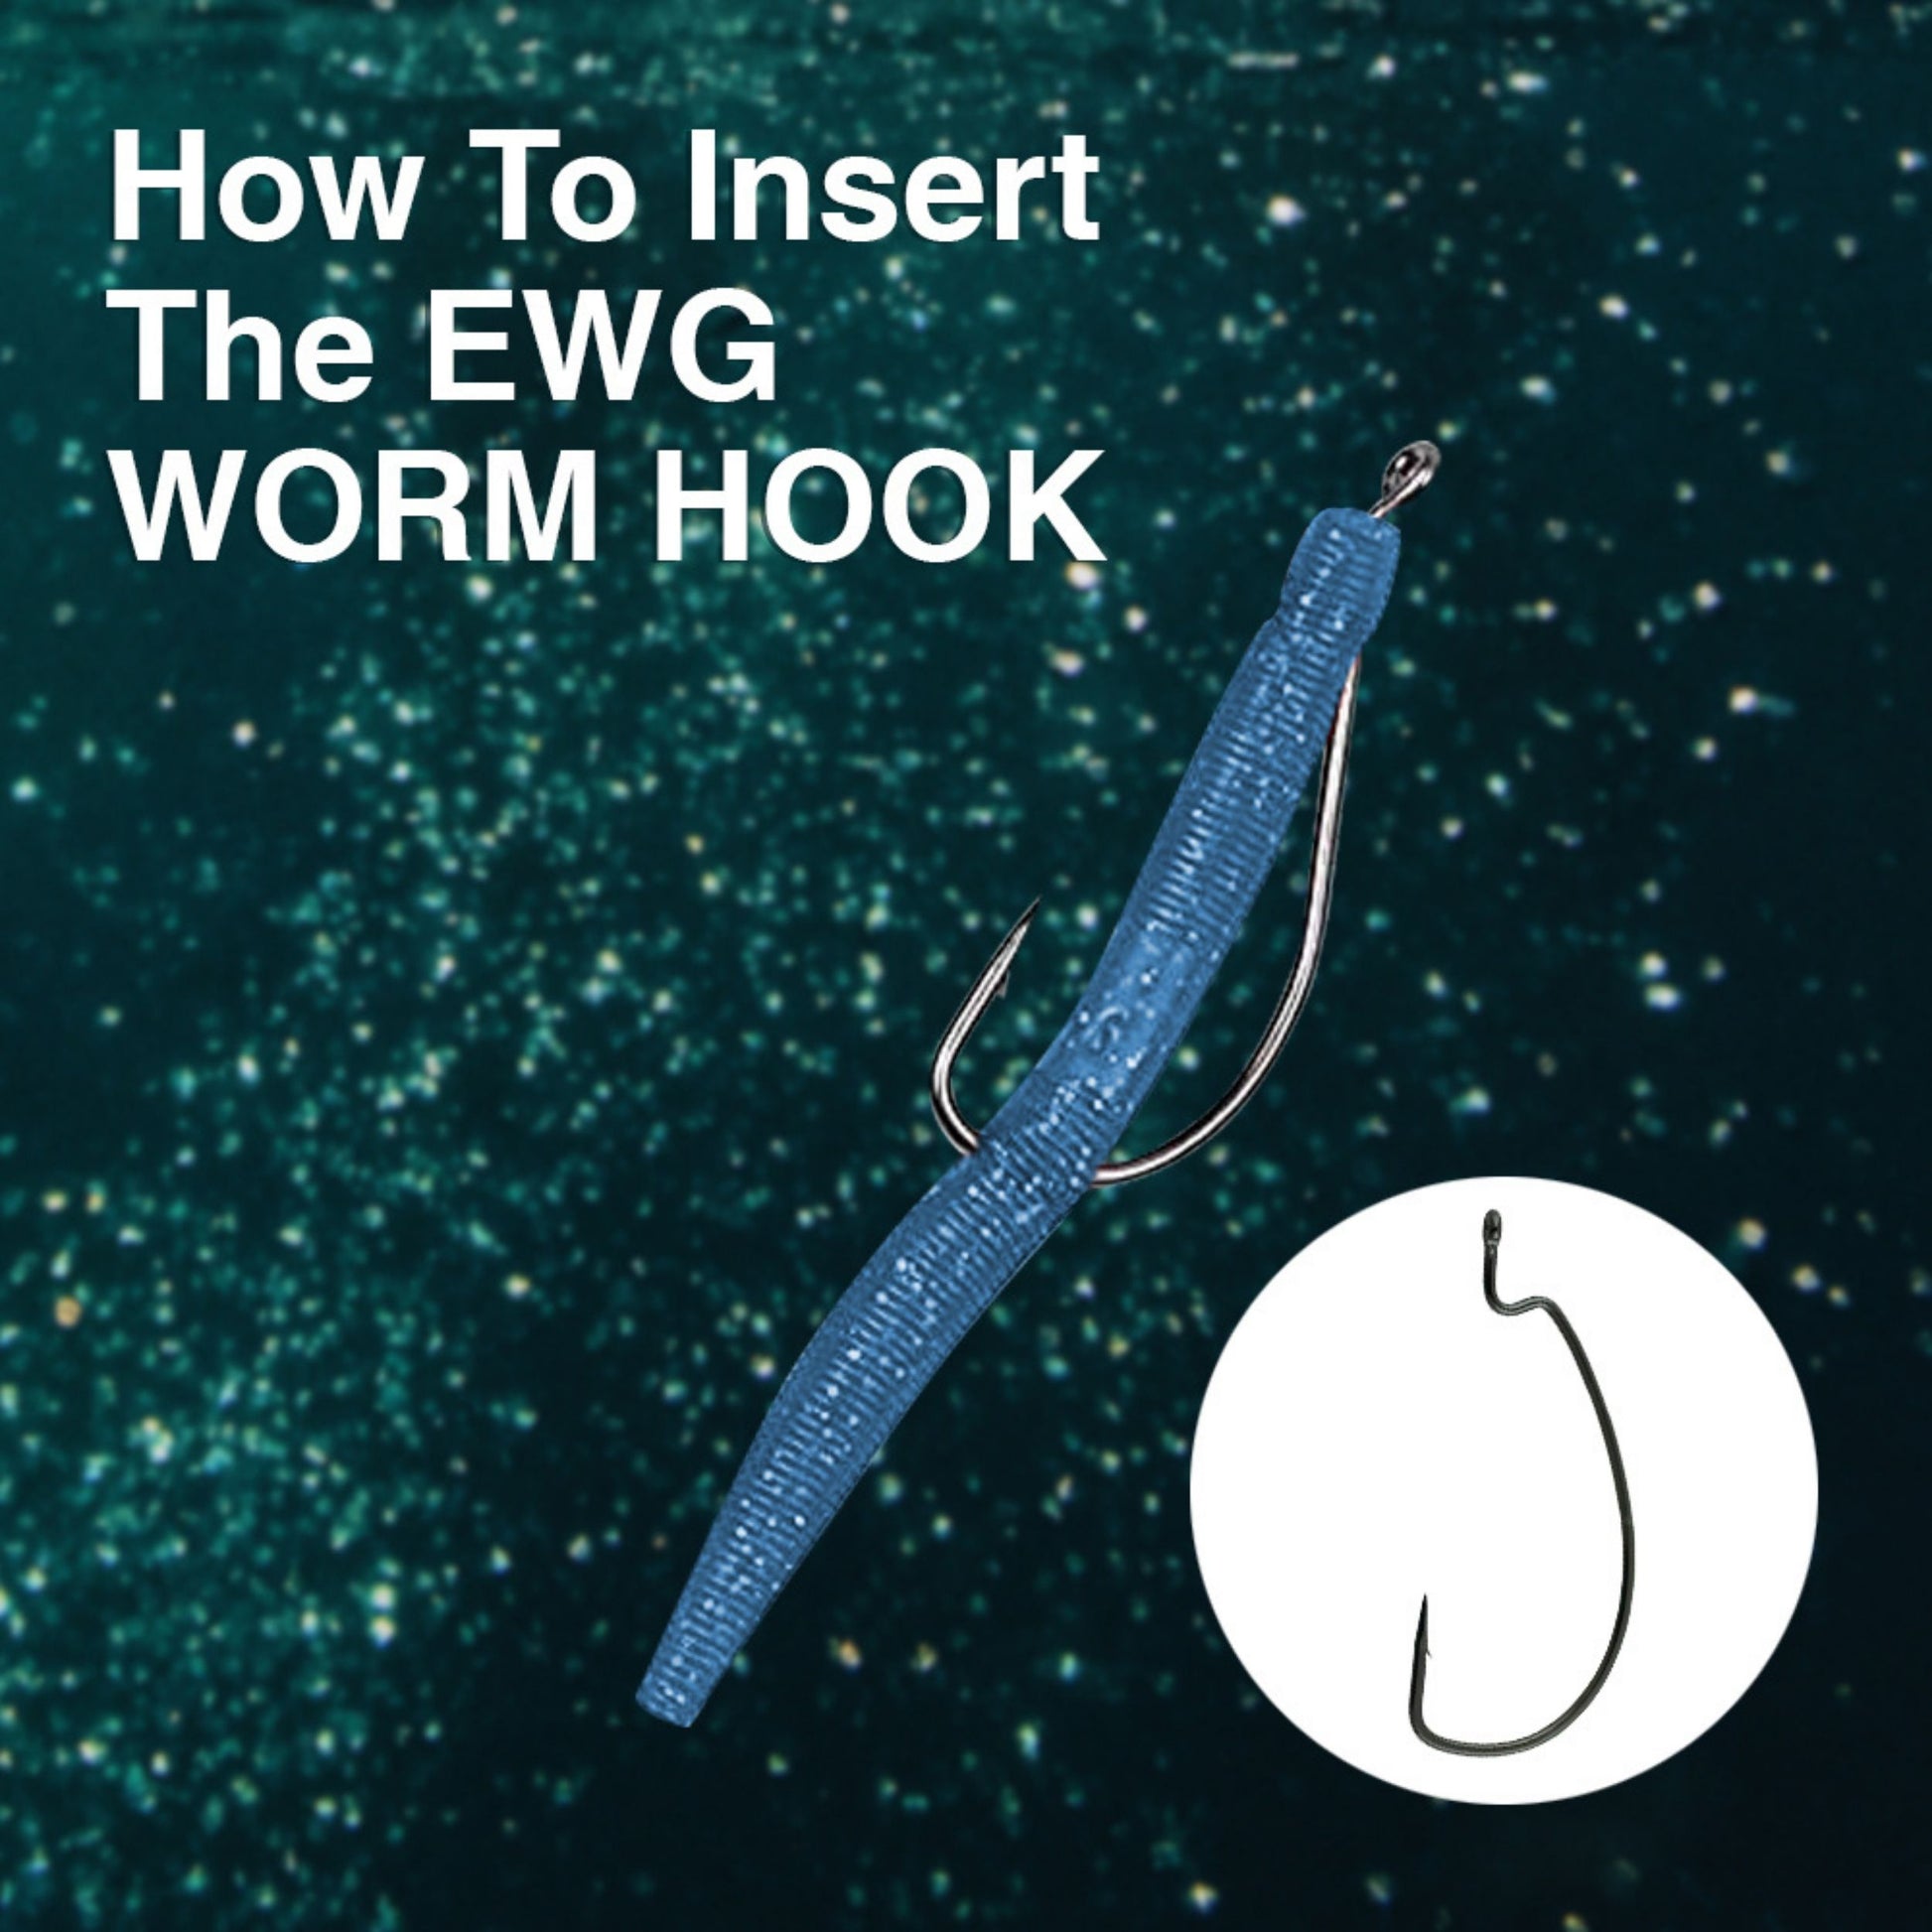 Eagle Claw Wide Gap Wacky Worm Hook, Size 2/0, 5 Pk - THE FISHING SOURCE